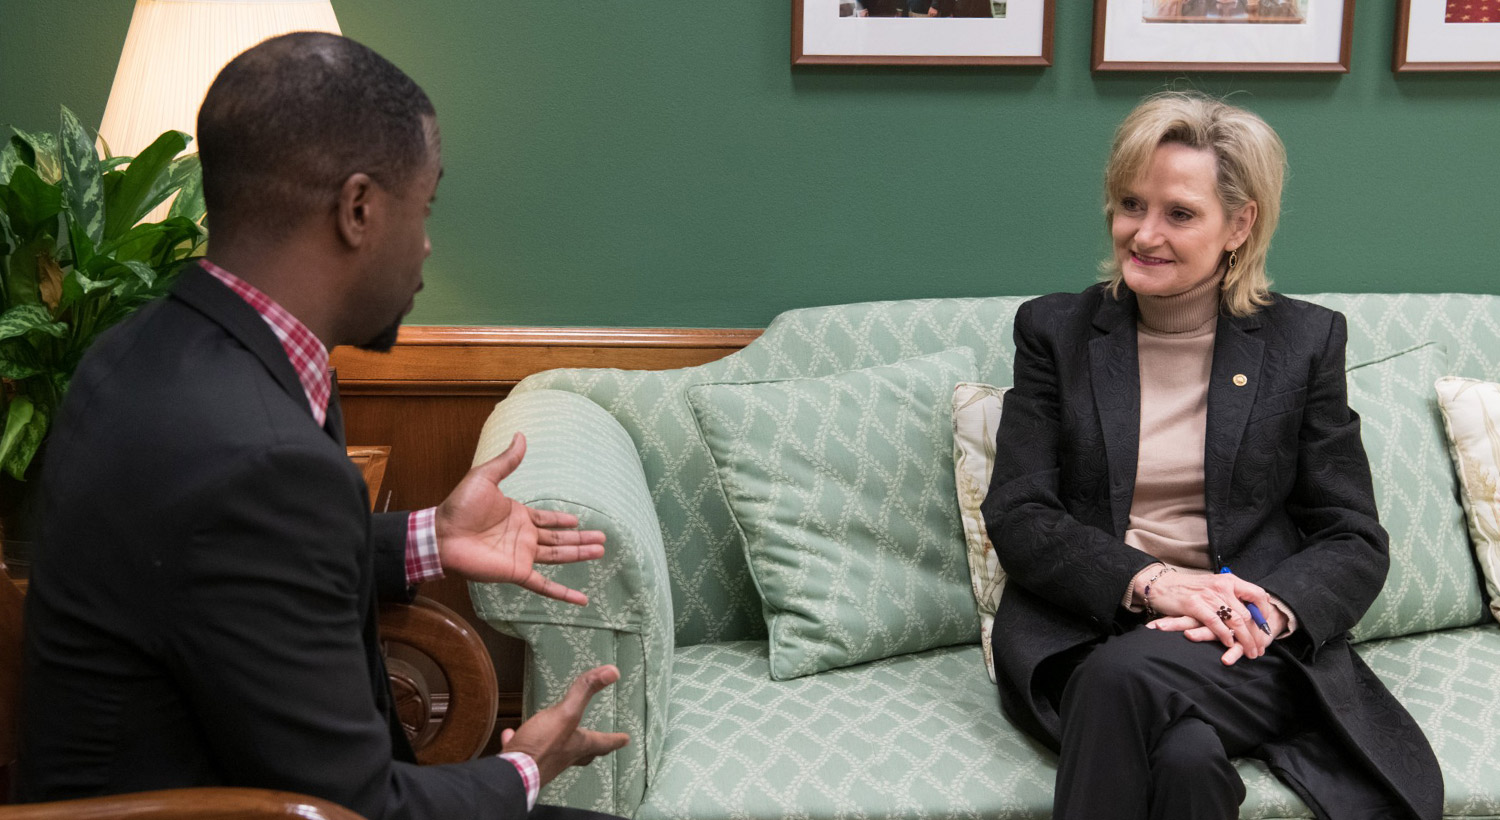 Senator Hyde-Smith meets with Mississippi native Melik Abdul of the Black Conservative Federation